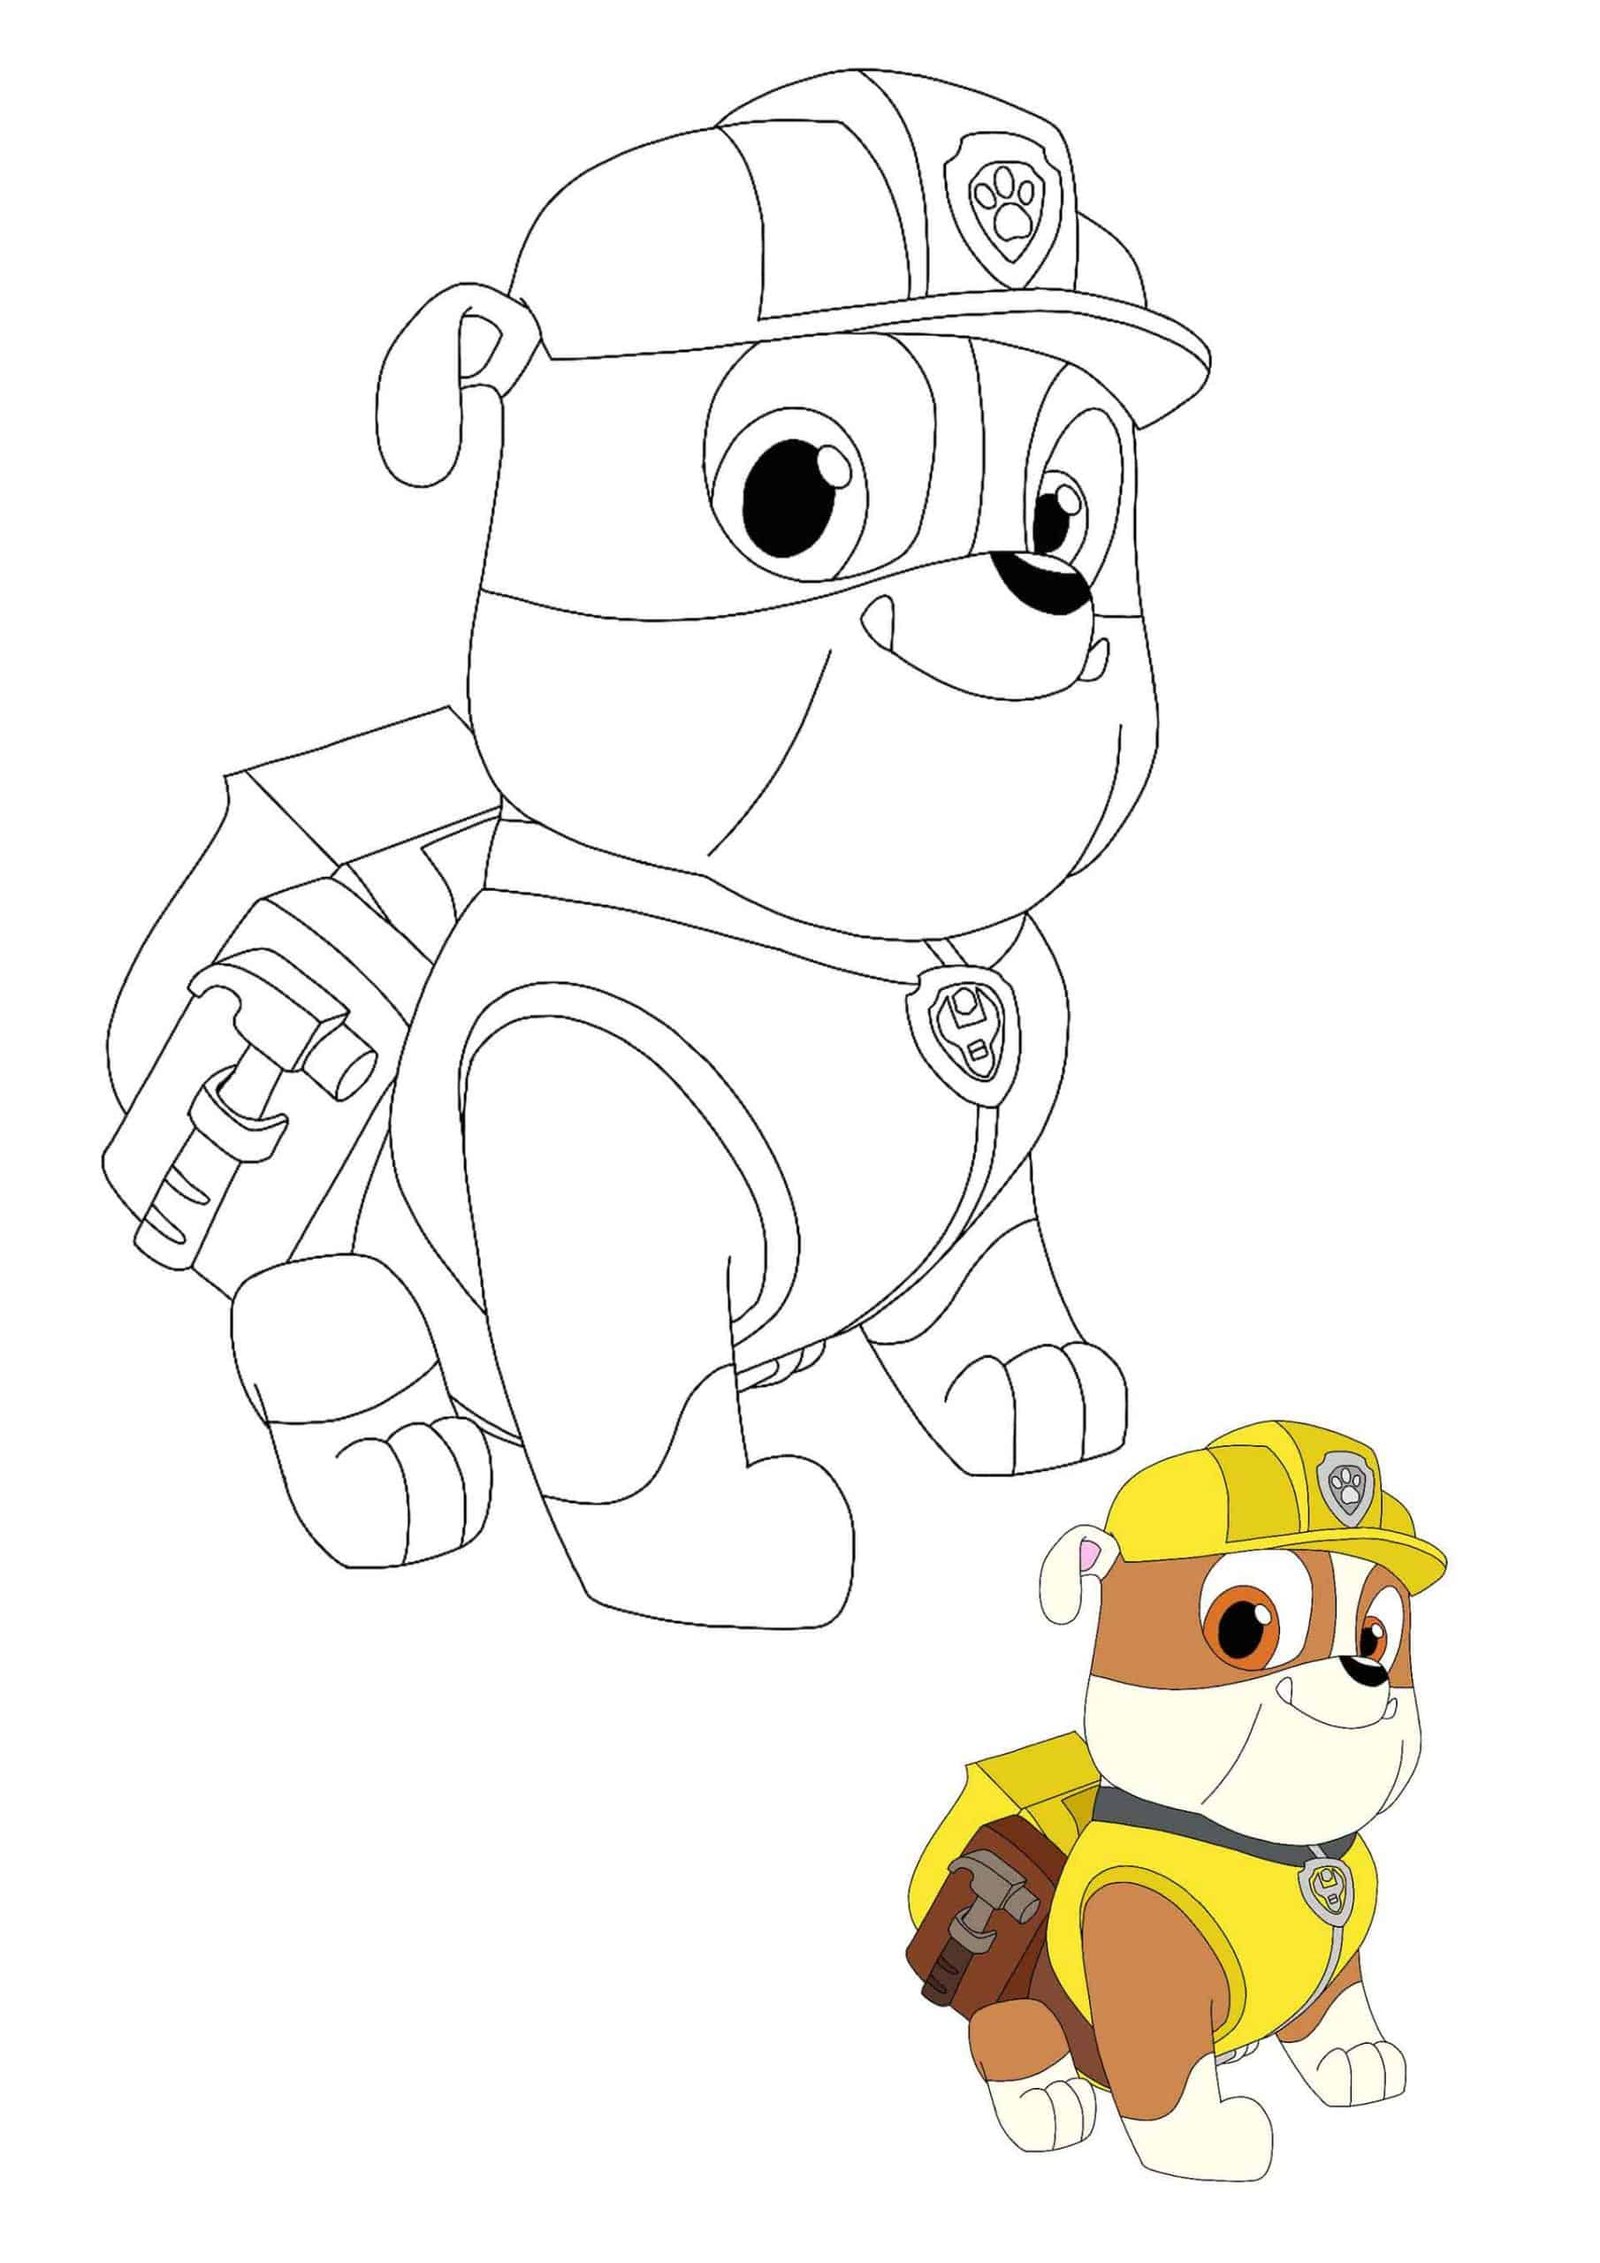 Paw Patrol Rubble coloring sheet with sample how to color